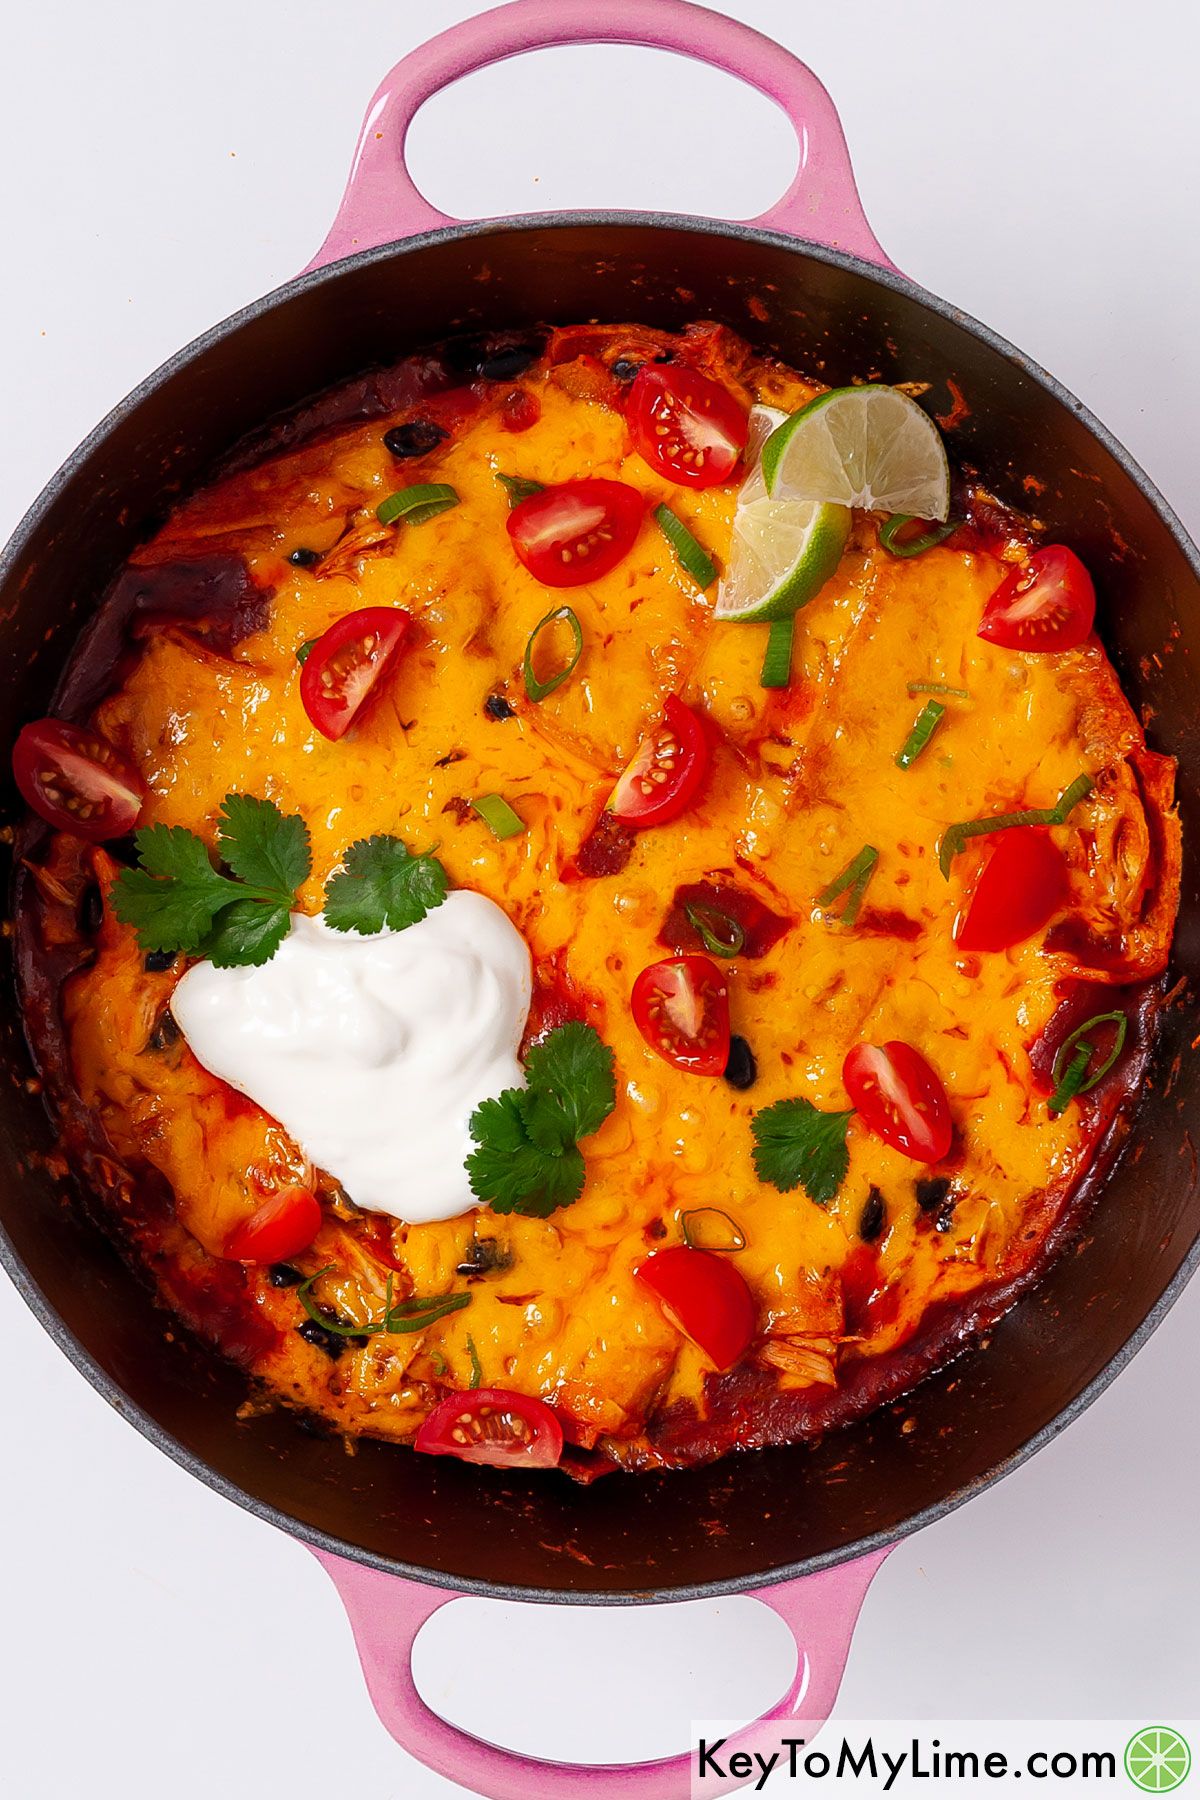 Chicken enchilada skillet garnished with fresh toppings.